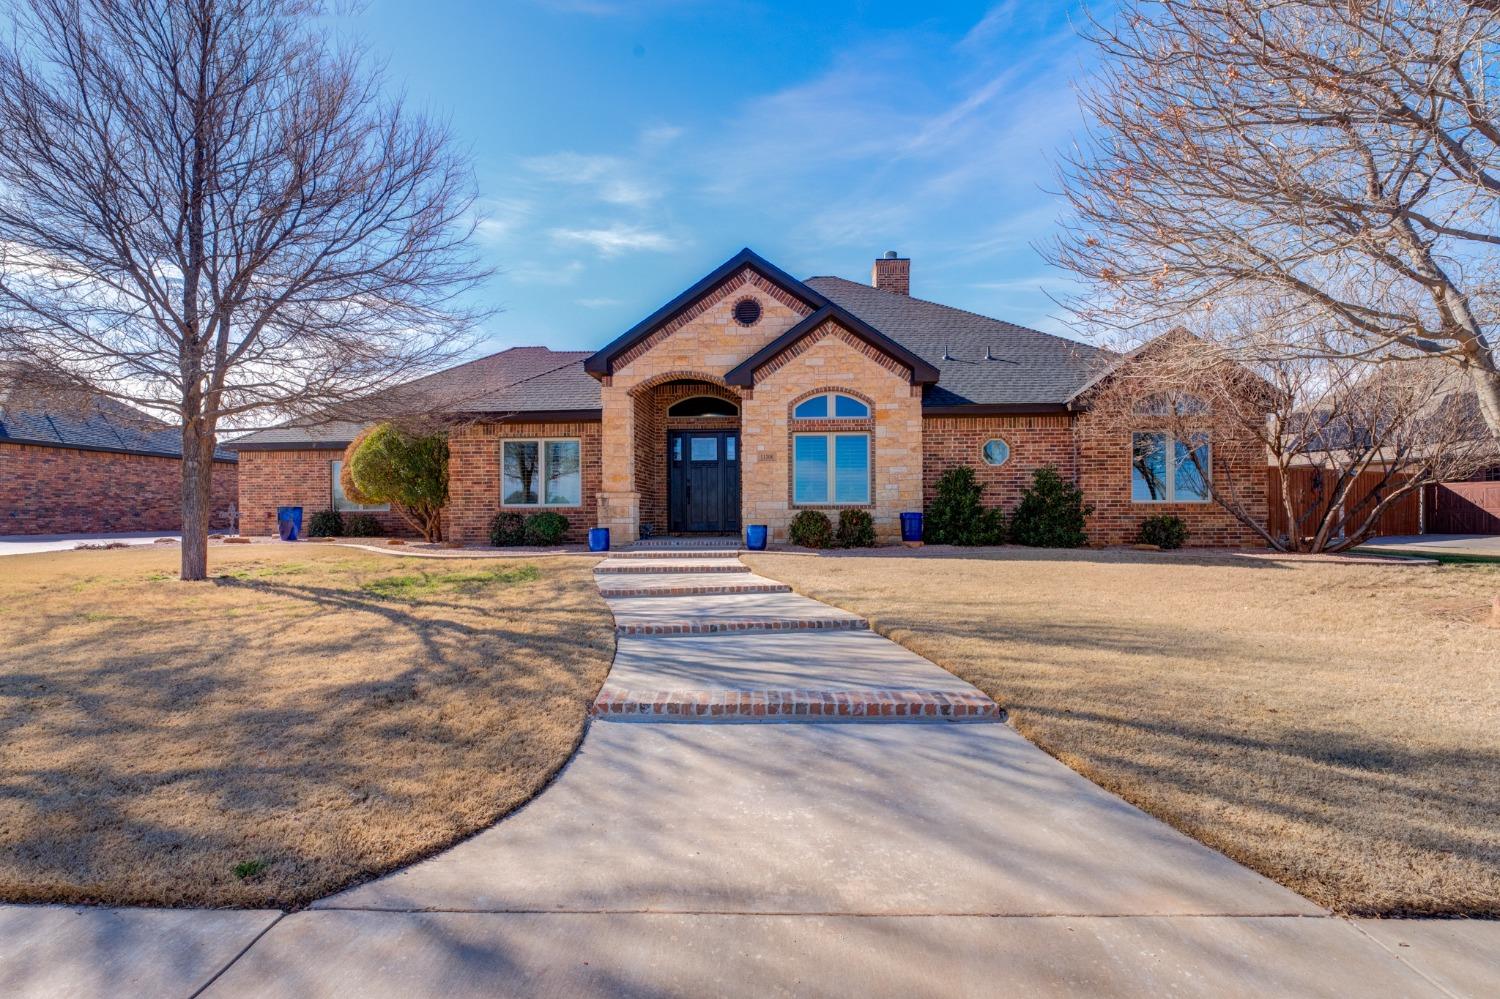 Fabulous 4/3/3 home on 1/2 acre lot in Fountain Hill Estates in Lubbock-Cooper ISD. As you enter this home, you will find fresh paint throughout, 12 foot ceilings, hard wood floors, a large kitchen featuring a bar area, granite countertops, a gas stove, and large pantry. The Master suite is isolated and features a walk in shower, granite countertops, and a large walk in closet with built ins. The other 3 bedrooms are a great size for children, guests, or even an office space. An extra feature is that the laundry room doubles as a safe room.  A wall of windows looks out onto the immaculate back yard and extended patio. This home also features a large bricked 30x40 workshop with built in work area and 16 foot doors to accommodate a large RV. This home has it all!